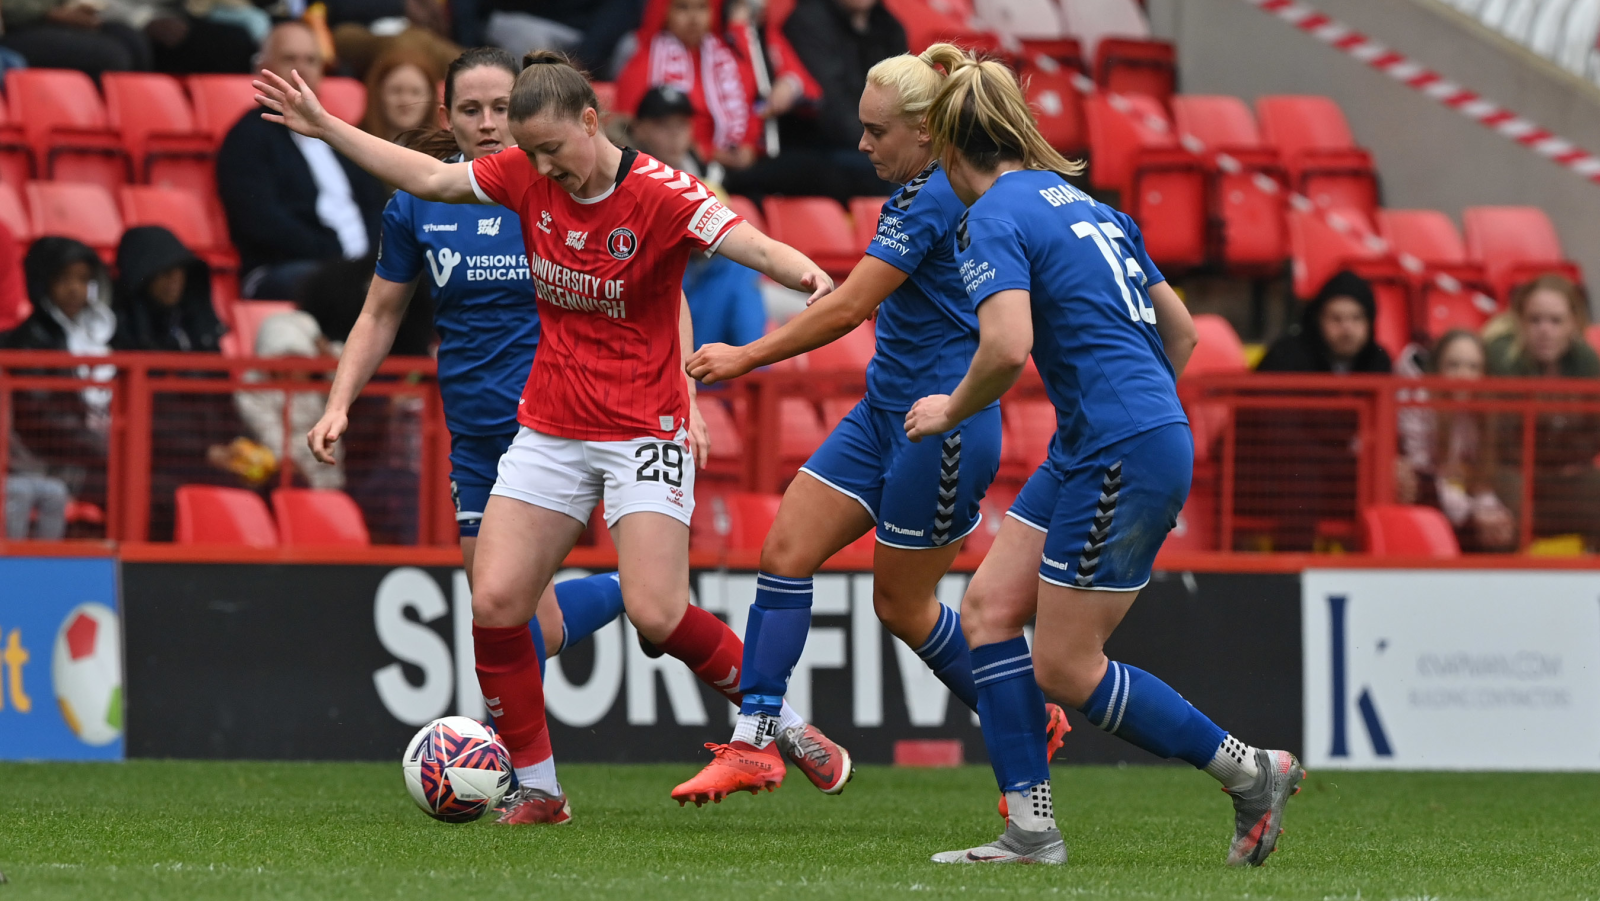 Charlton midfielder Mia Ross in possession against Durham Women at The Valley